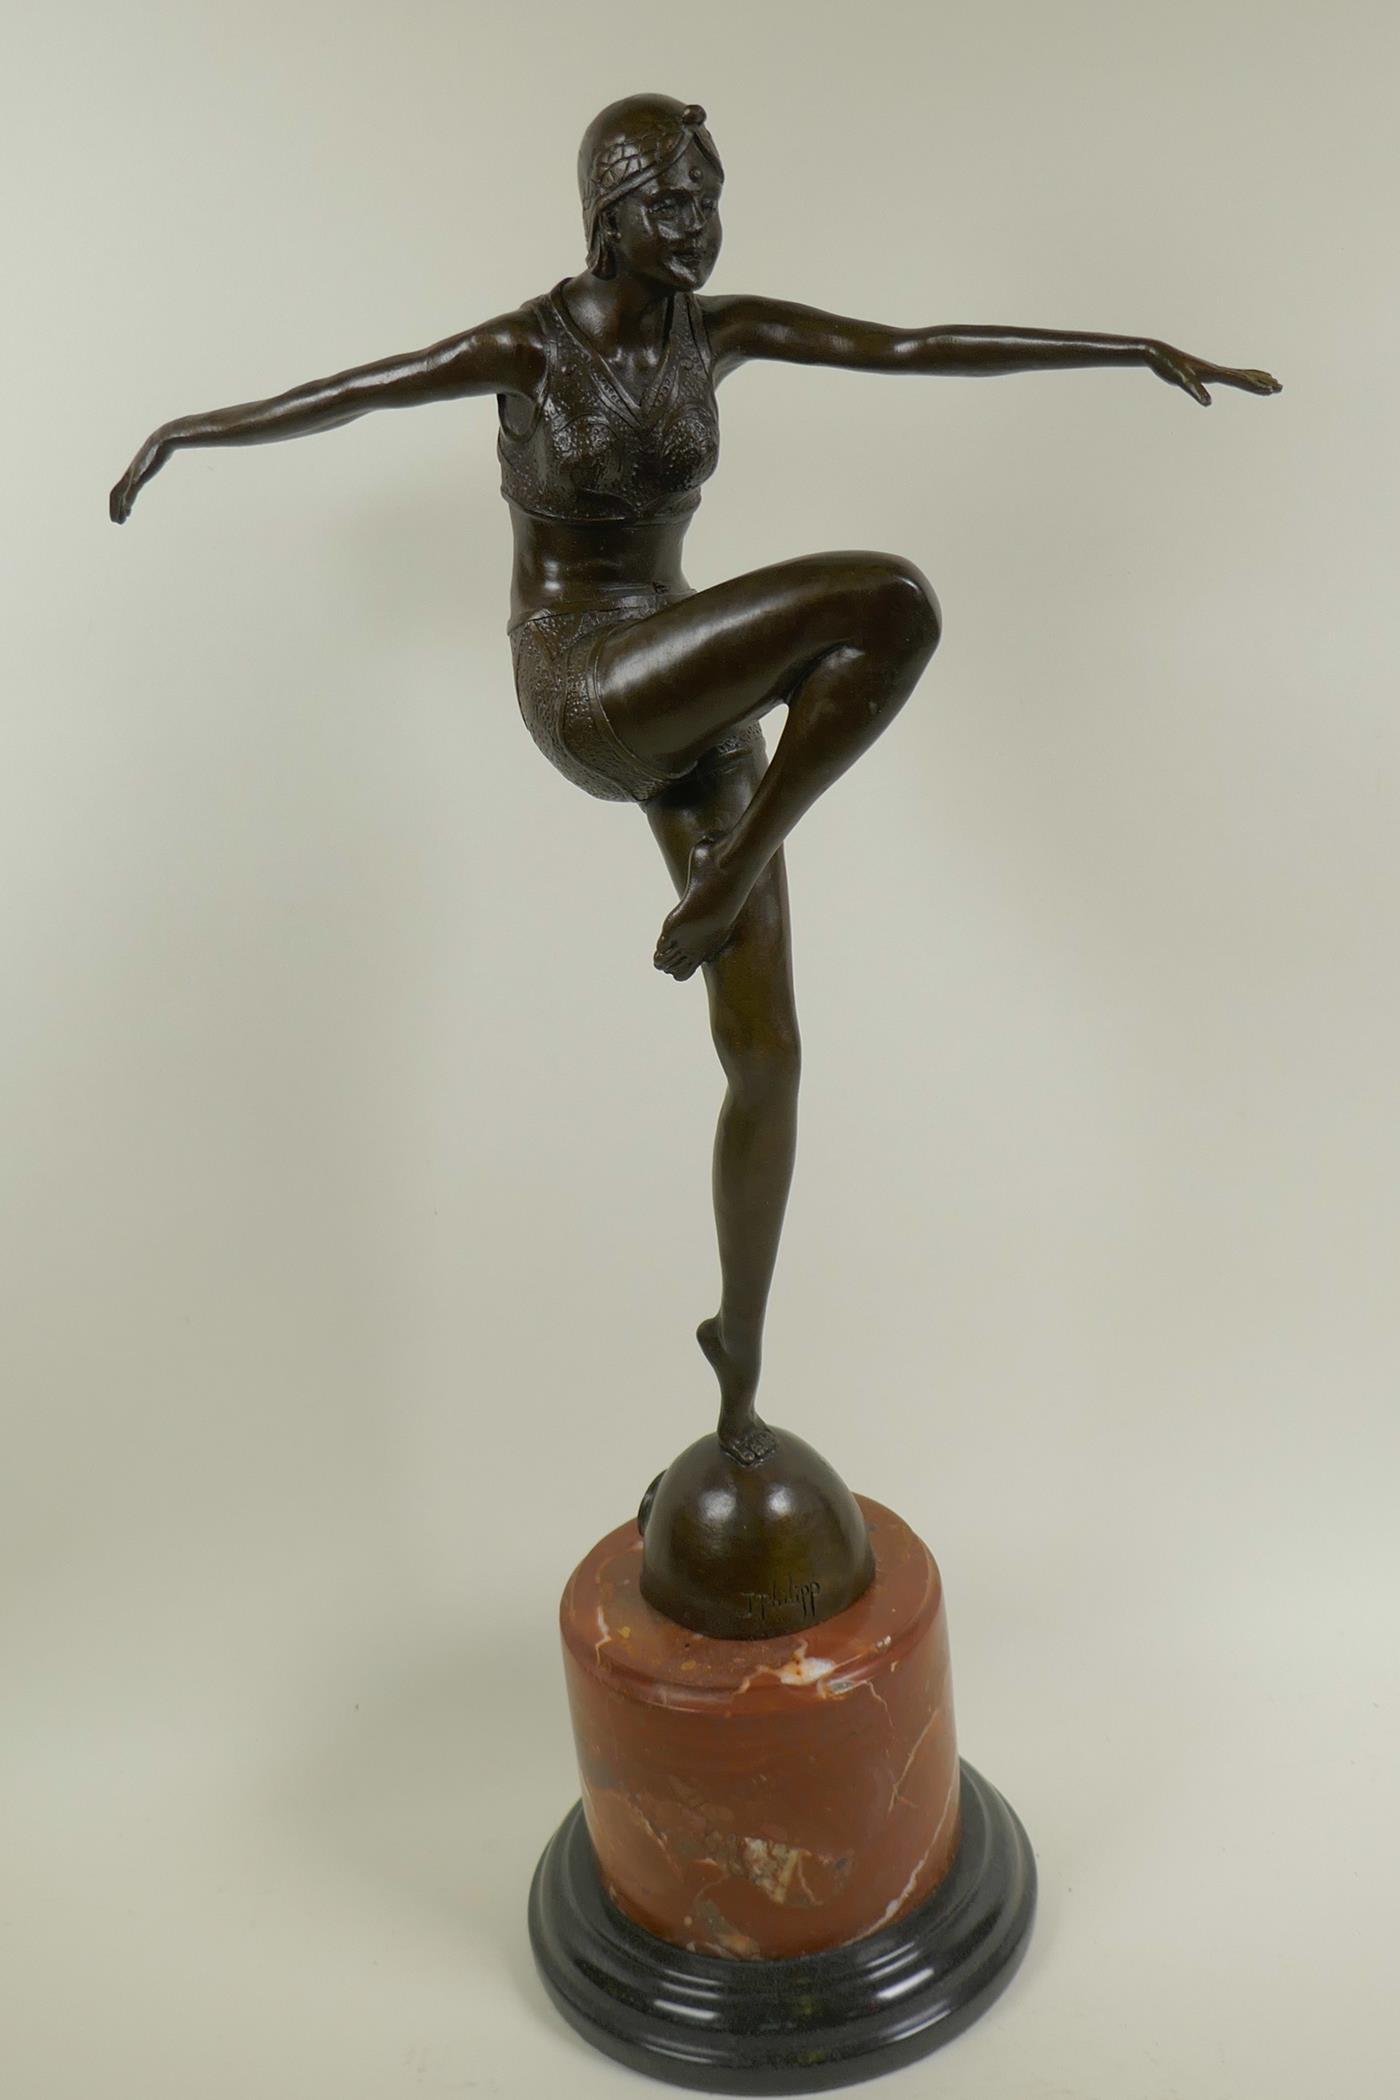 An Art Deco style bronze figure of a dancing girl, on a marble plinth, 22" high